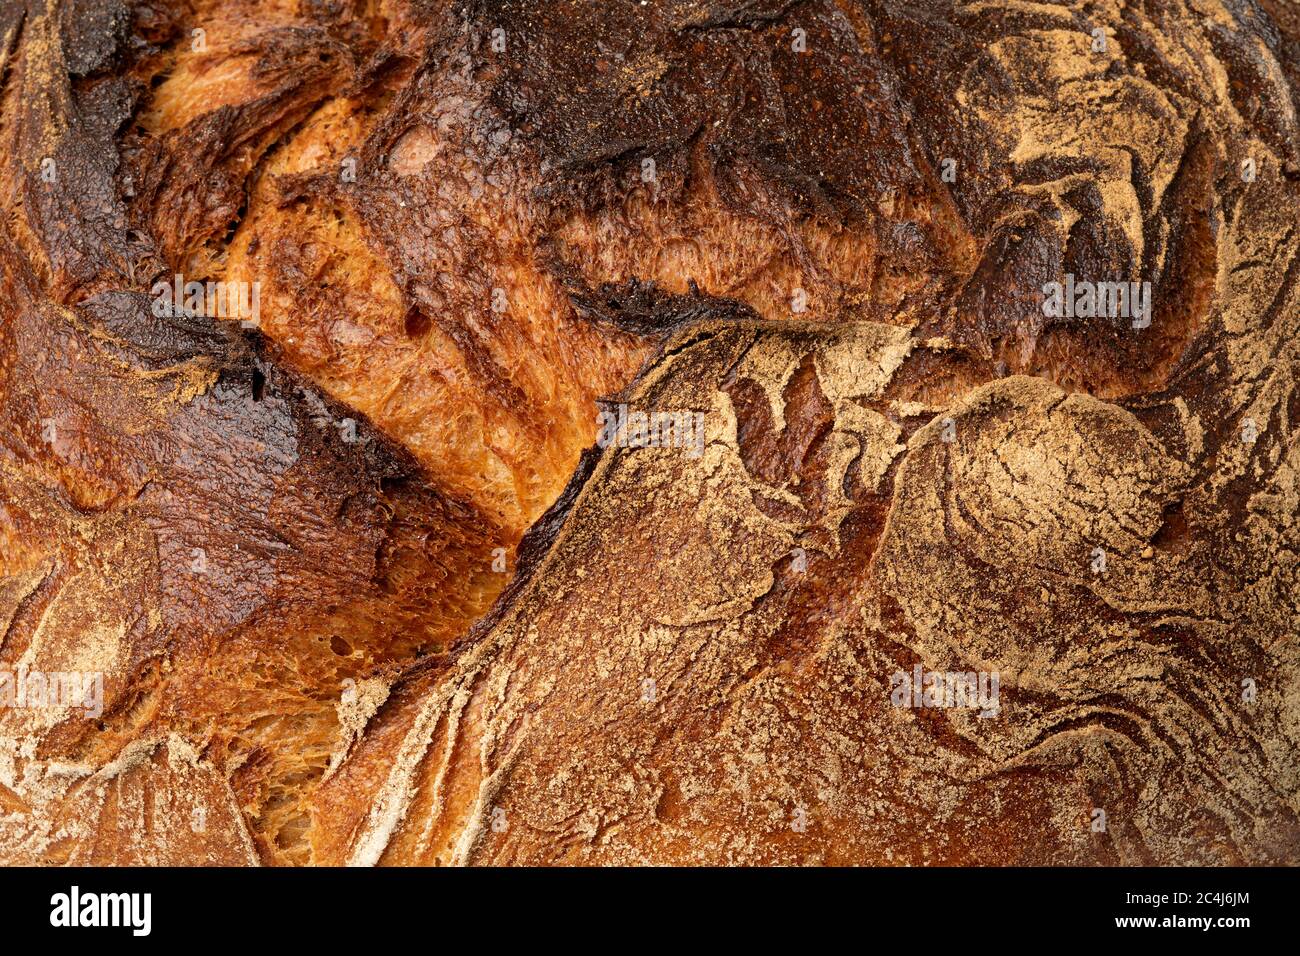 Crust of a fresh baked German farmers bread close up full frame Stock Photo